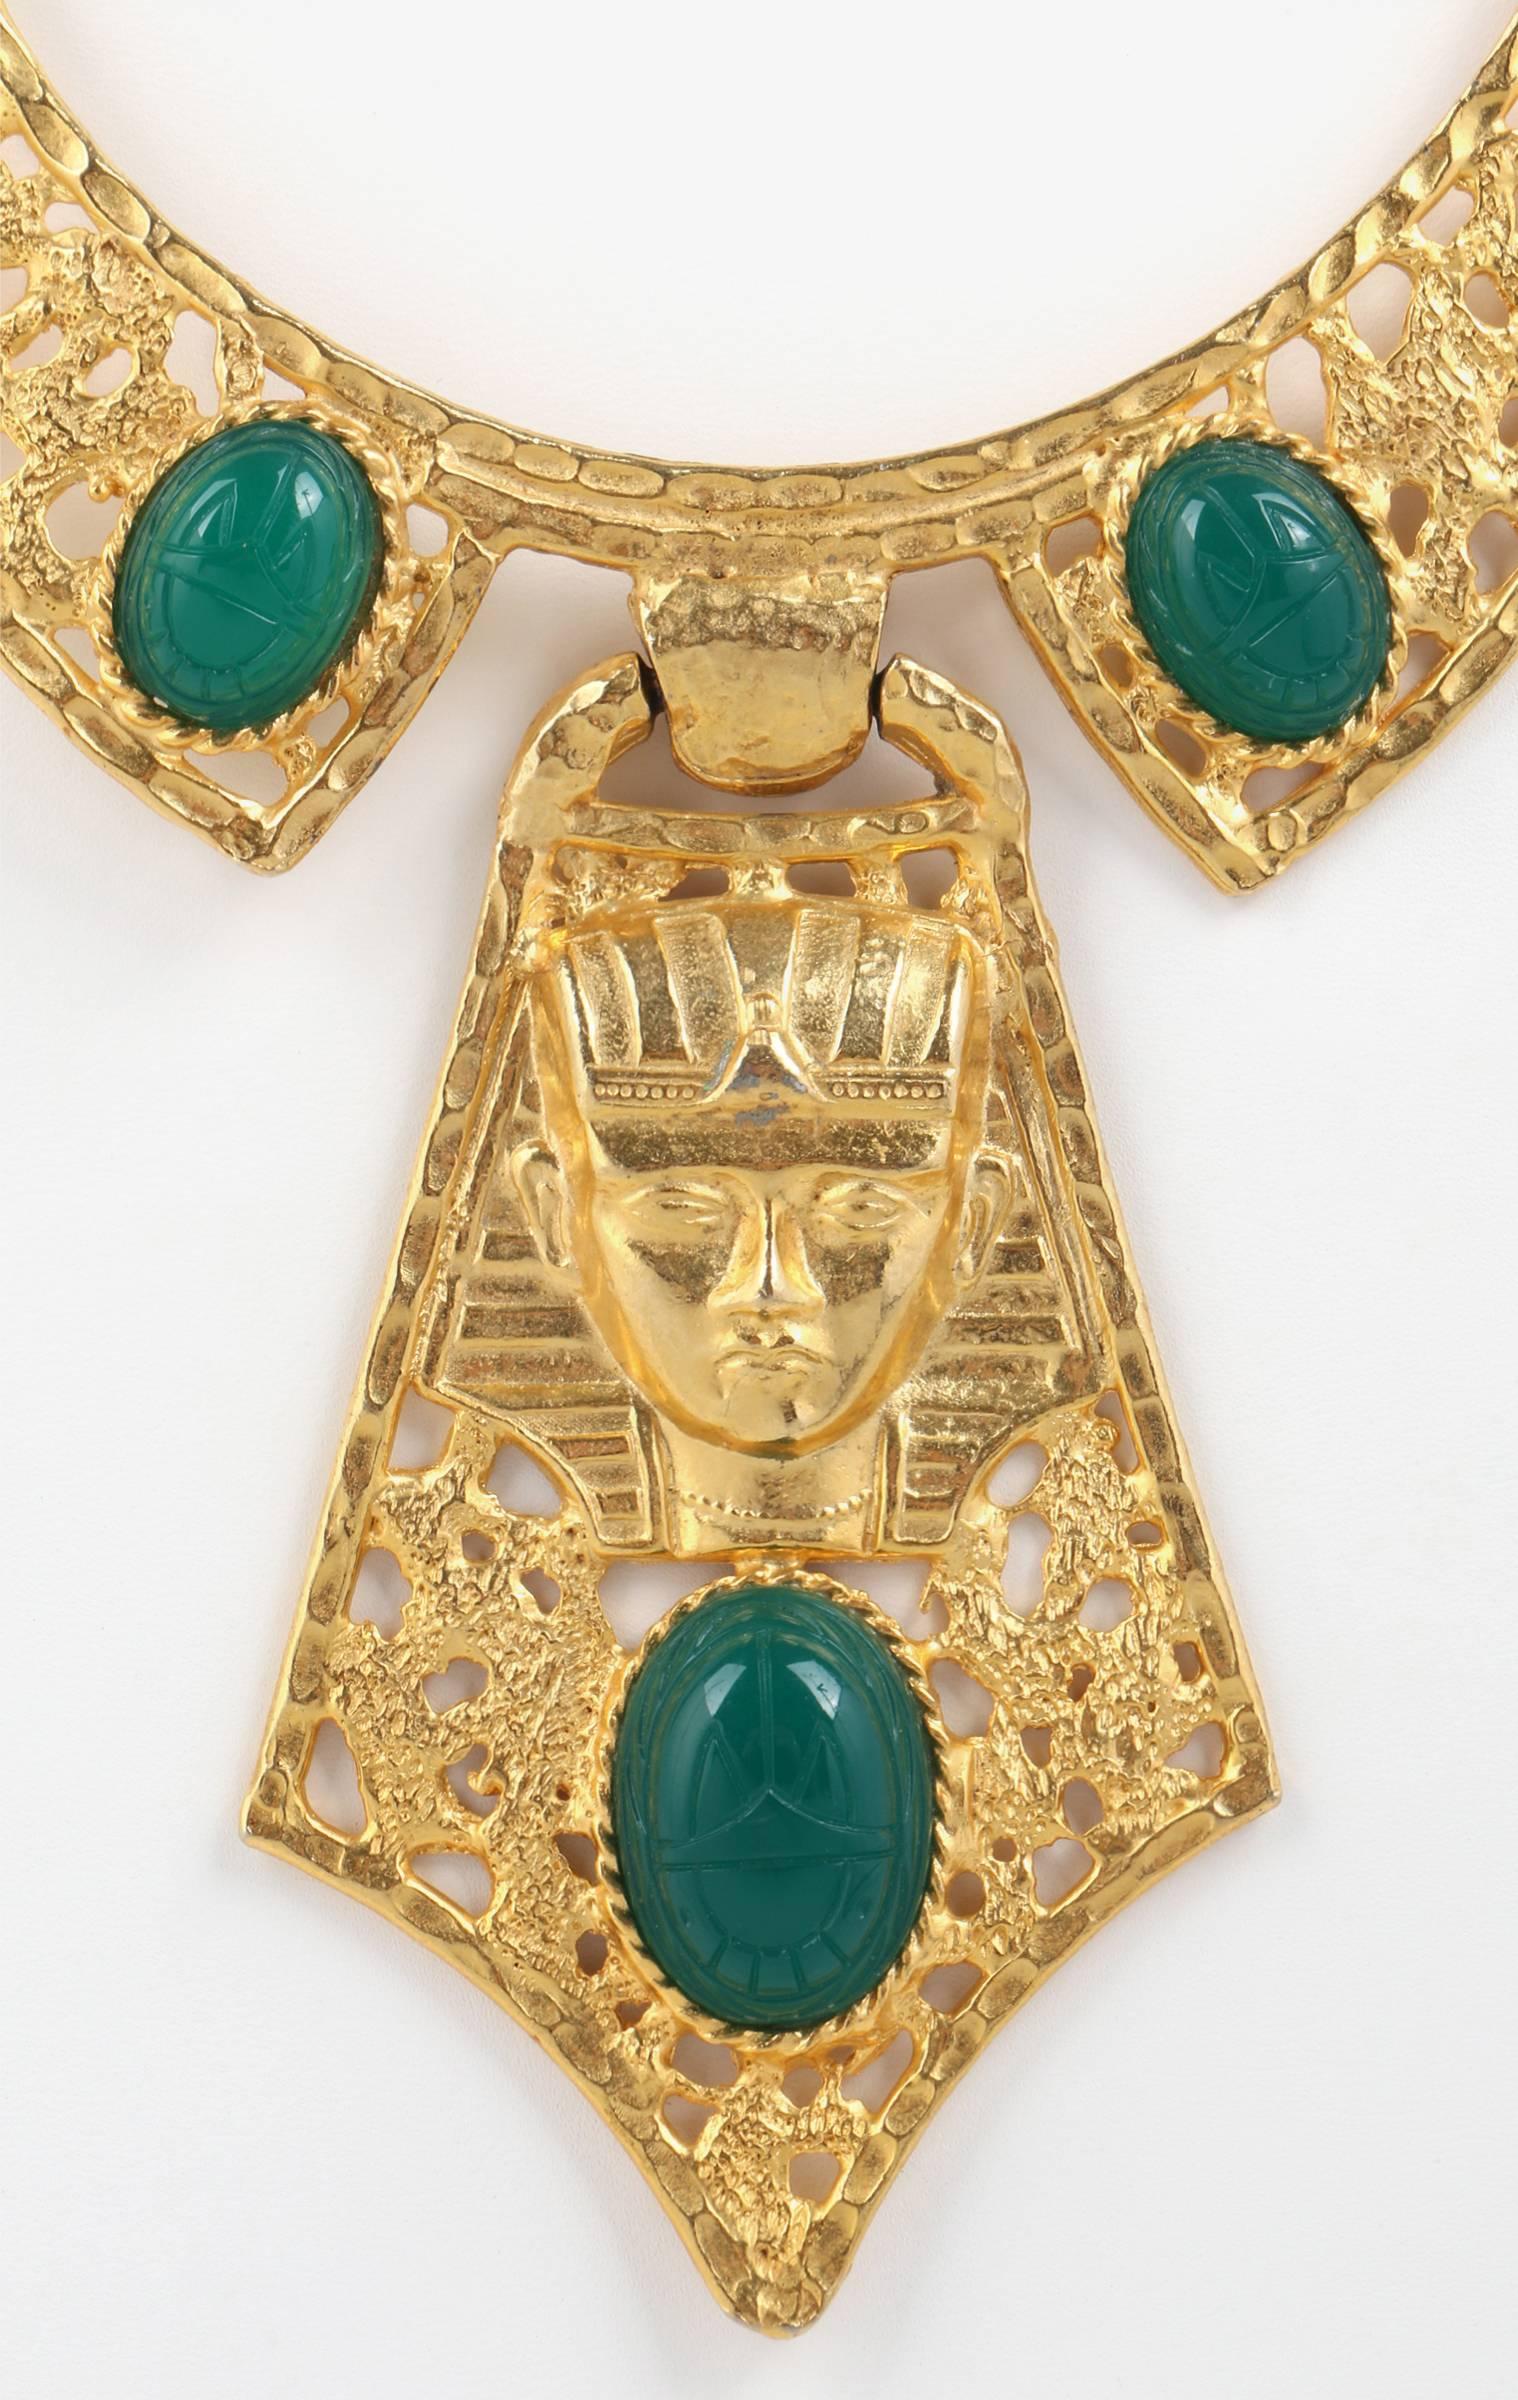 Vintage c.1960s Hattie Carnegie large Egyptian Revival gold-tone necklace with three green scarabs. Collar/bib style with two scarabs set in gold tone open work metal (scarabs measure approximately 3/4